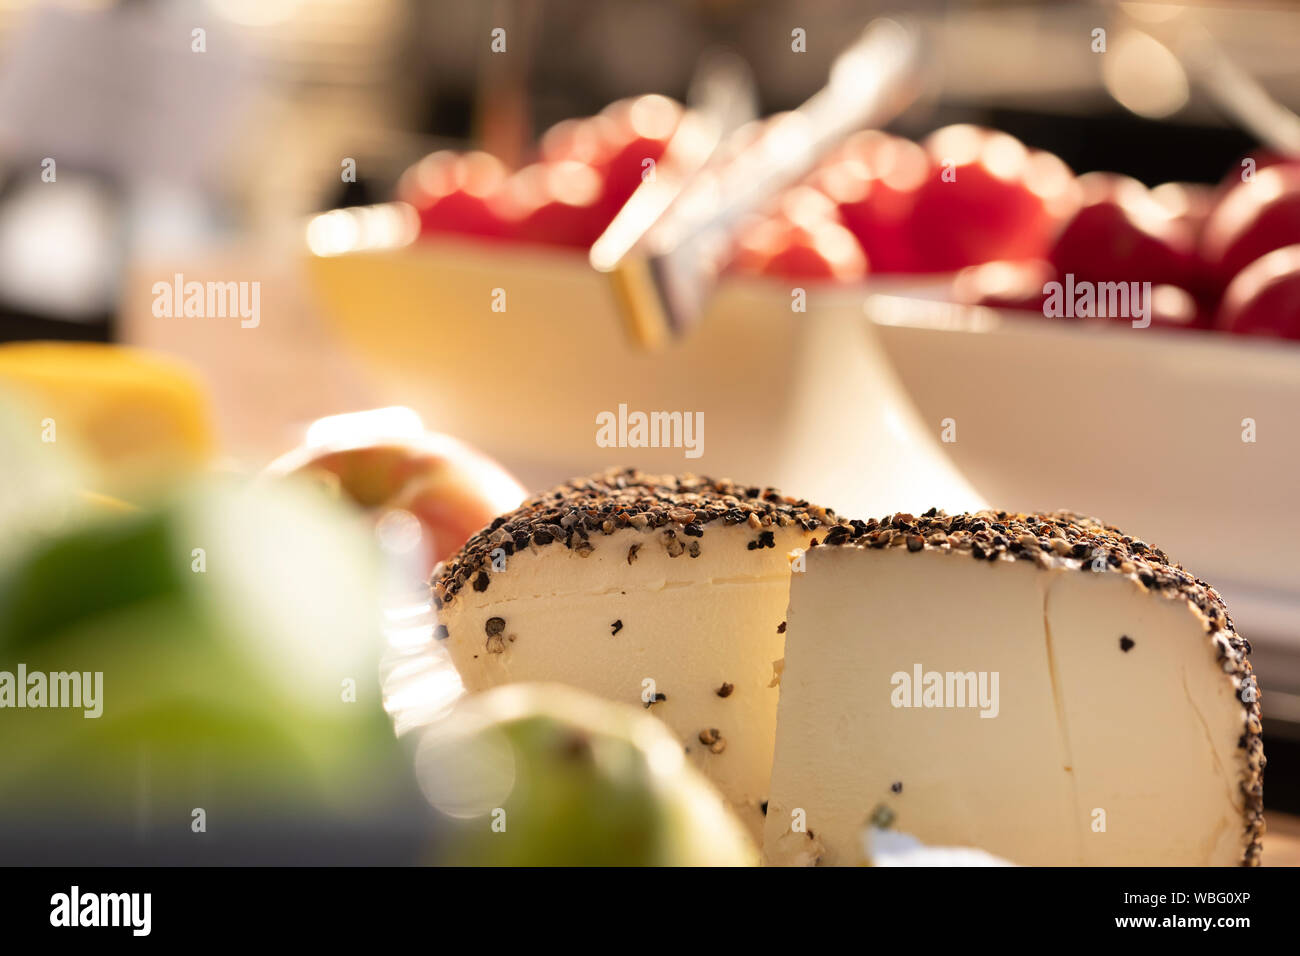 slice of cheese with a pepper rind on a buffet and blurred tomatoes in the background Stock Photo